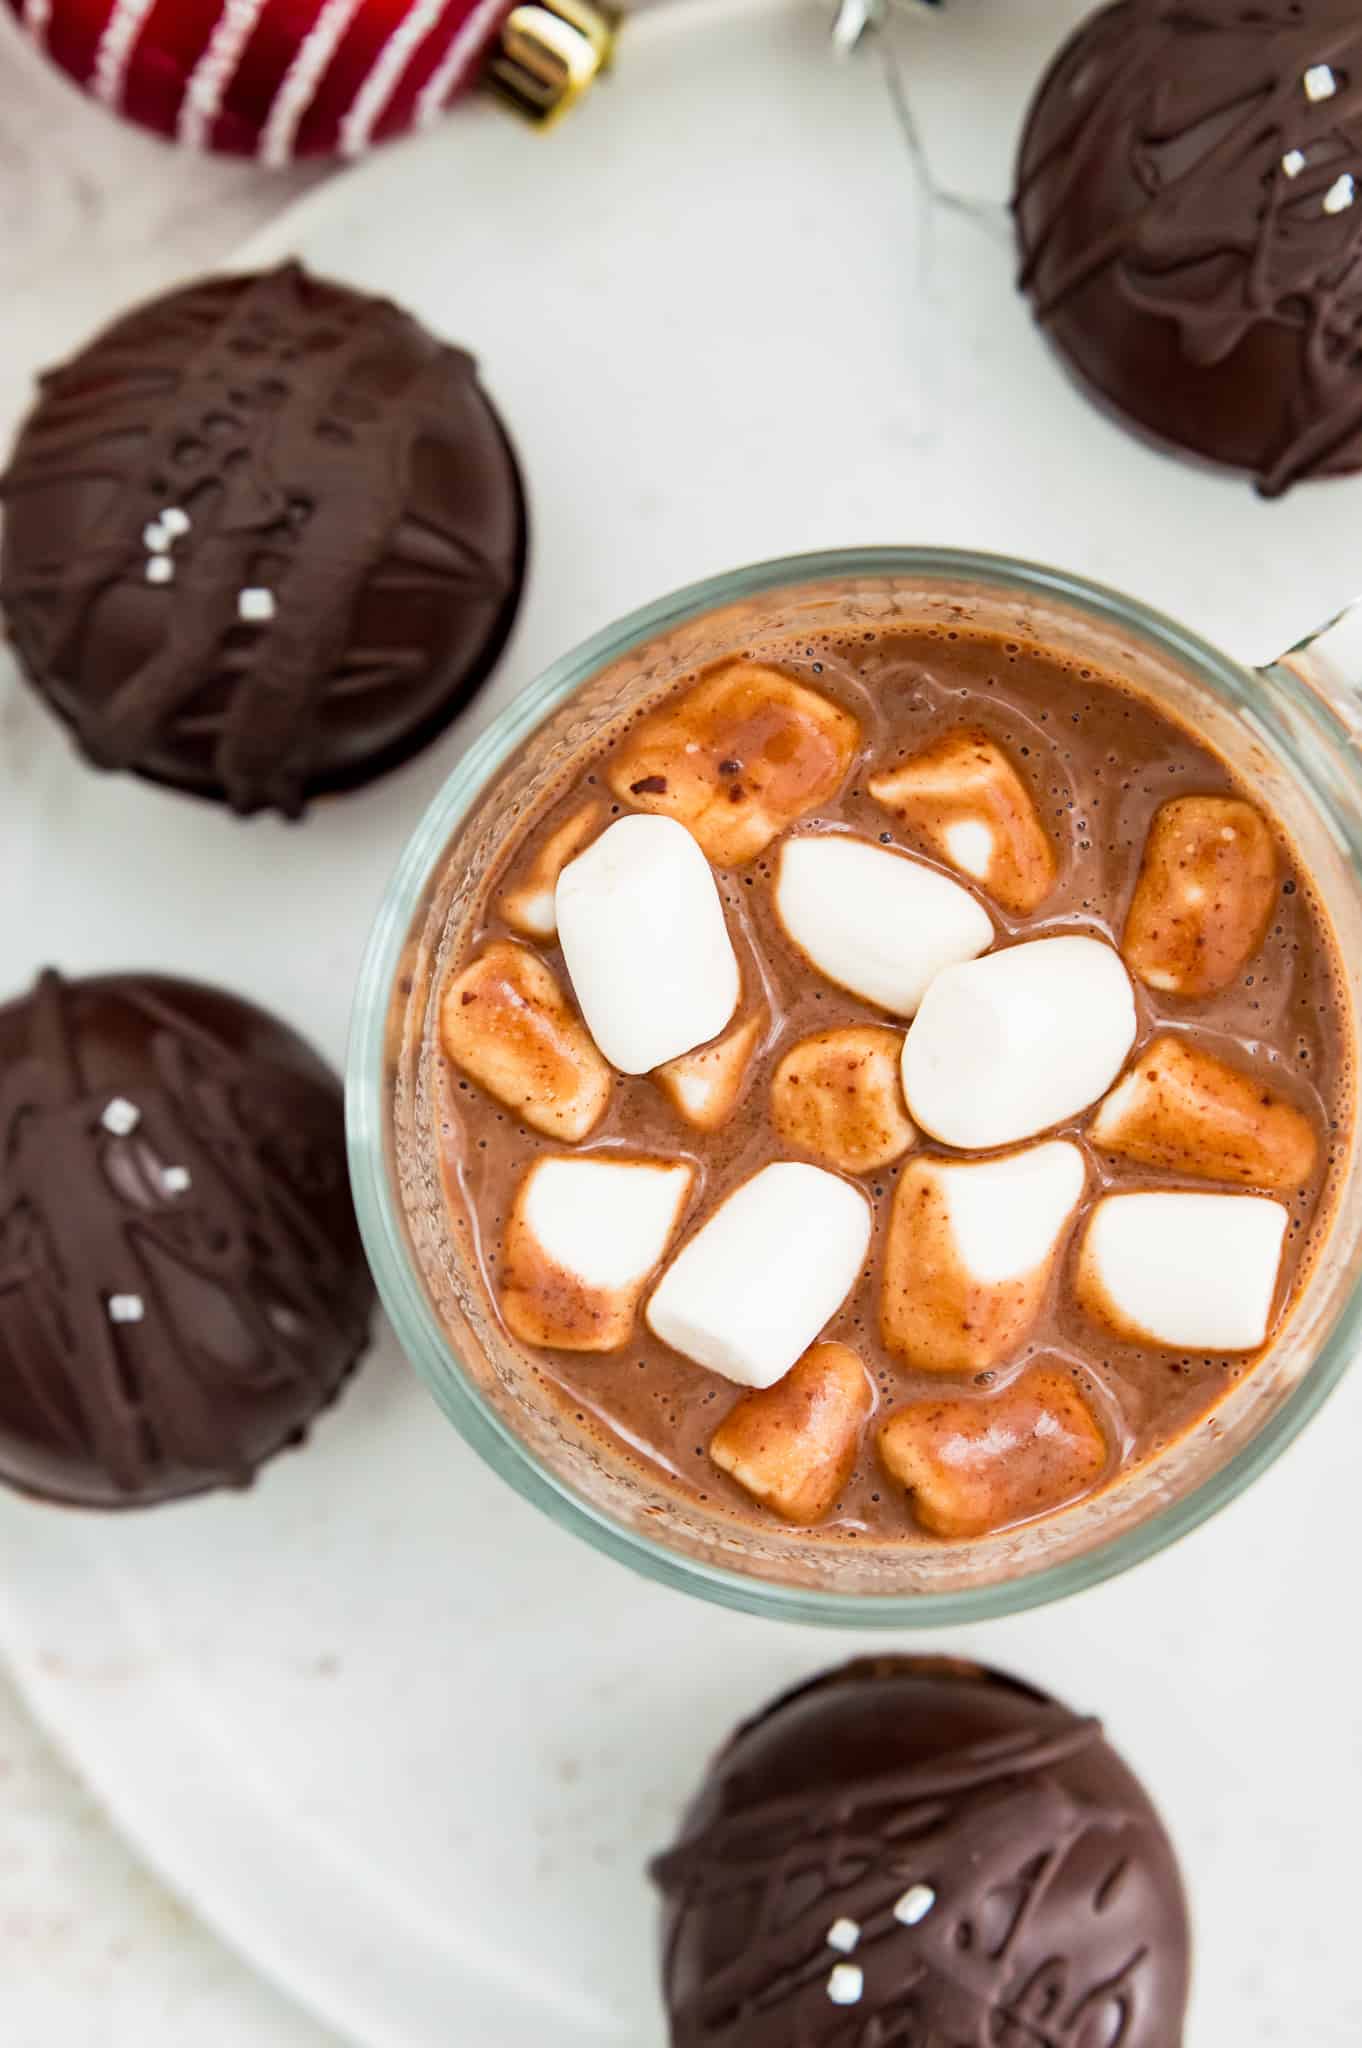 A mug of hot chocolate with mini marshmallows on top.